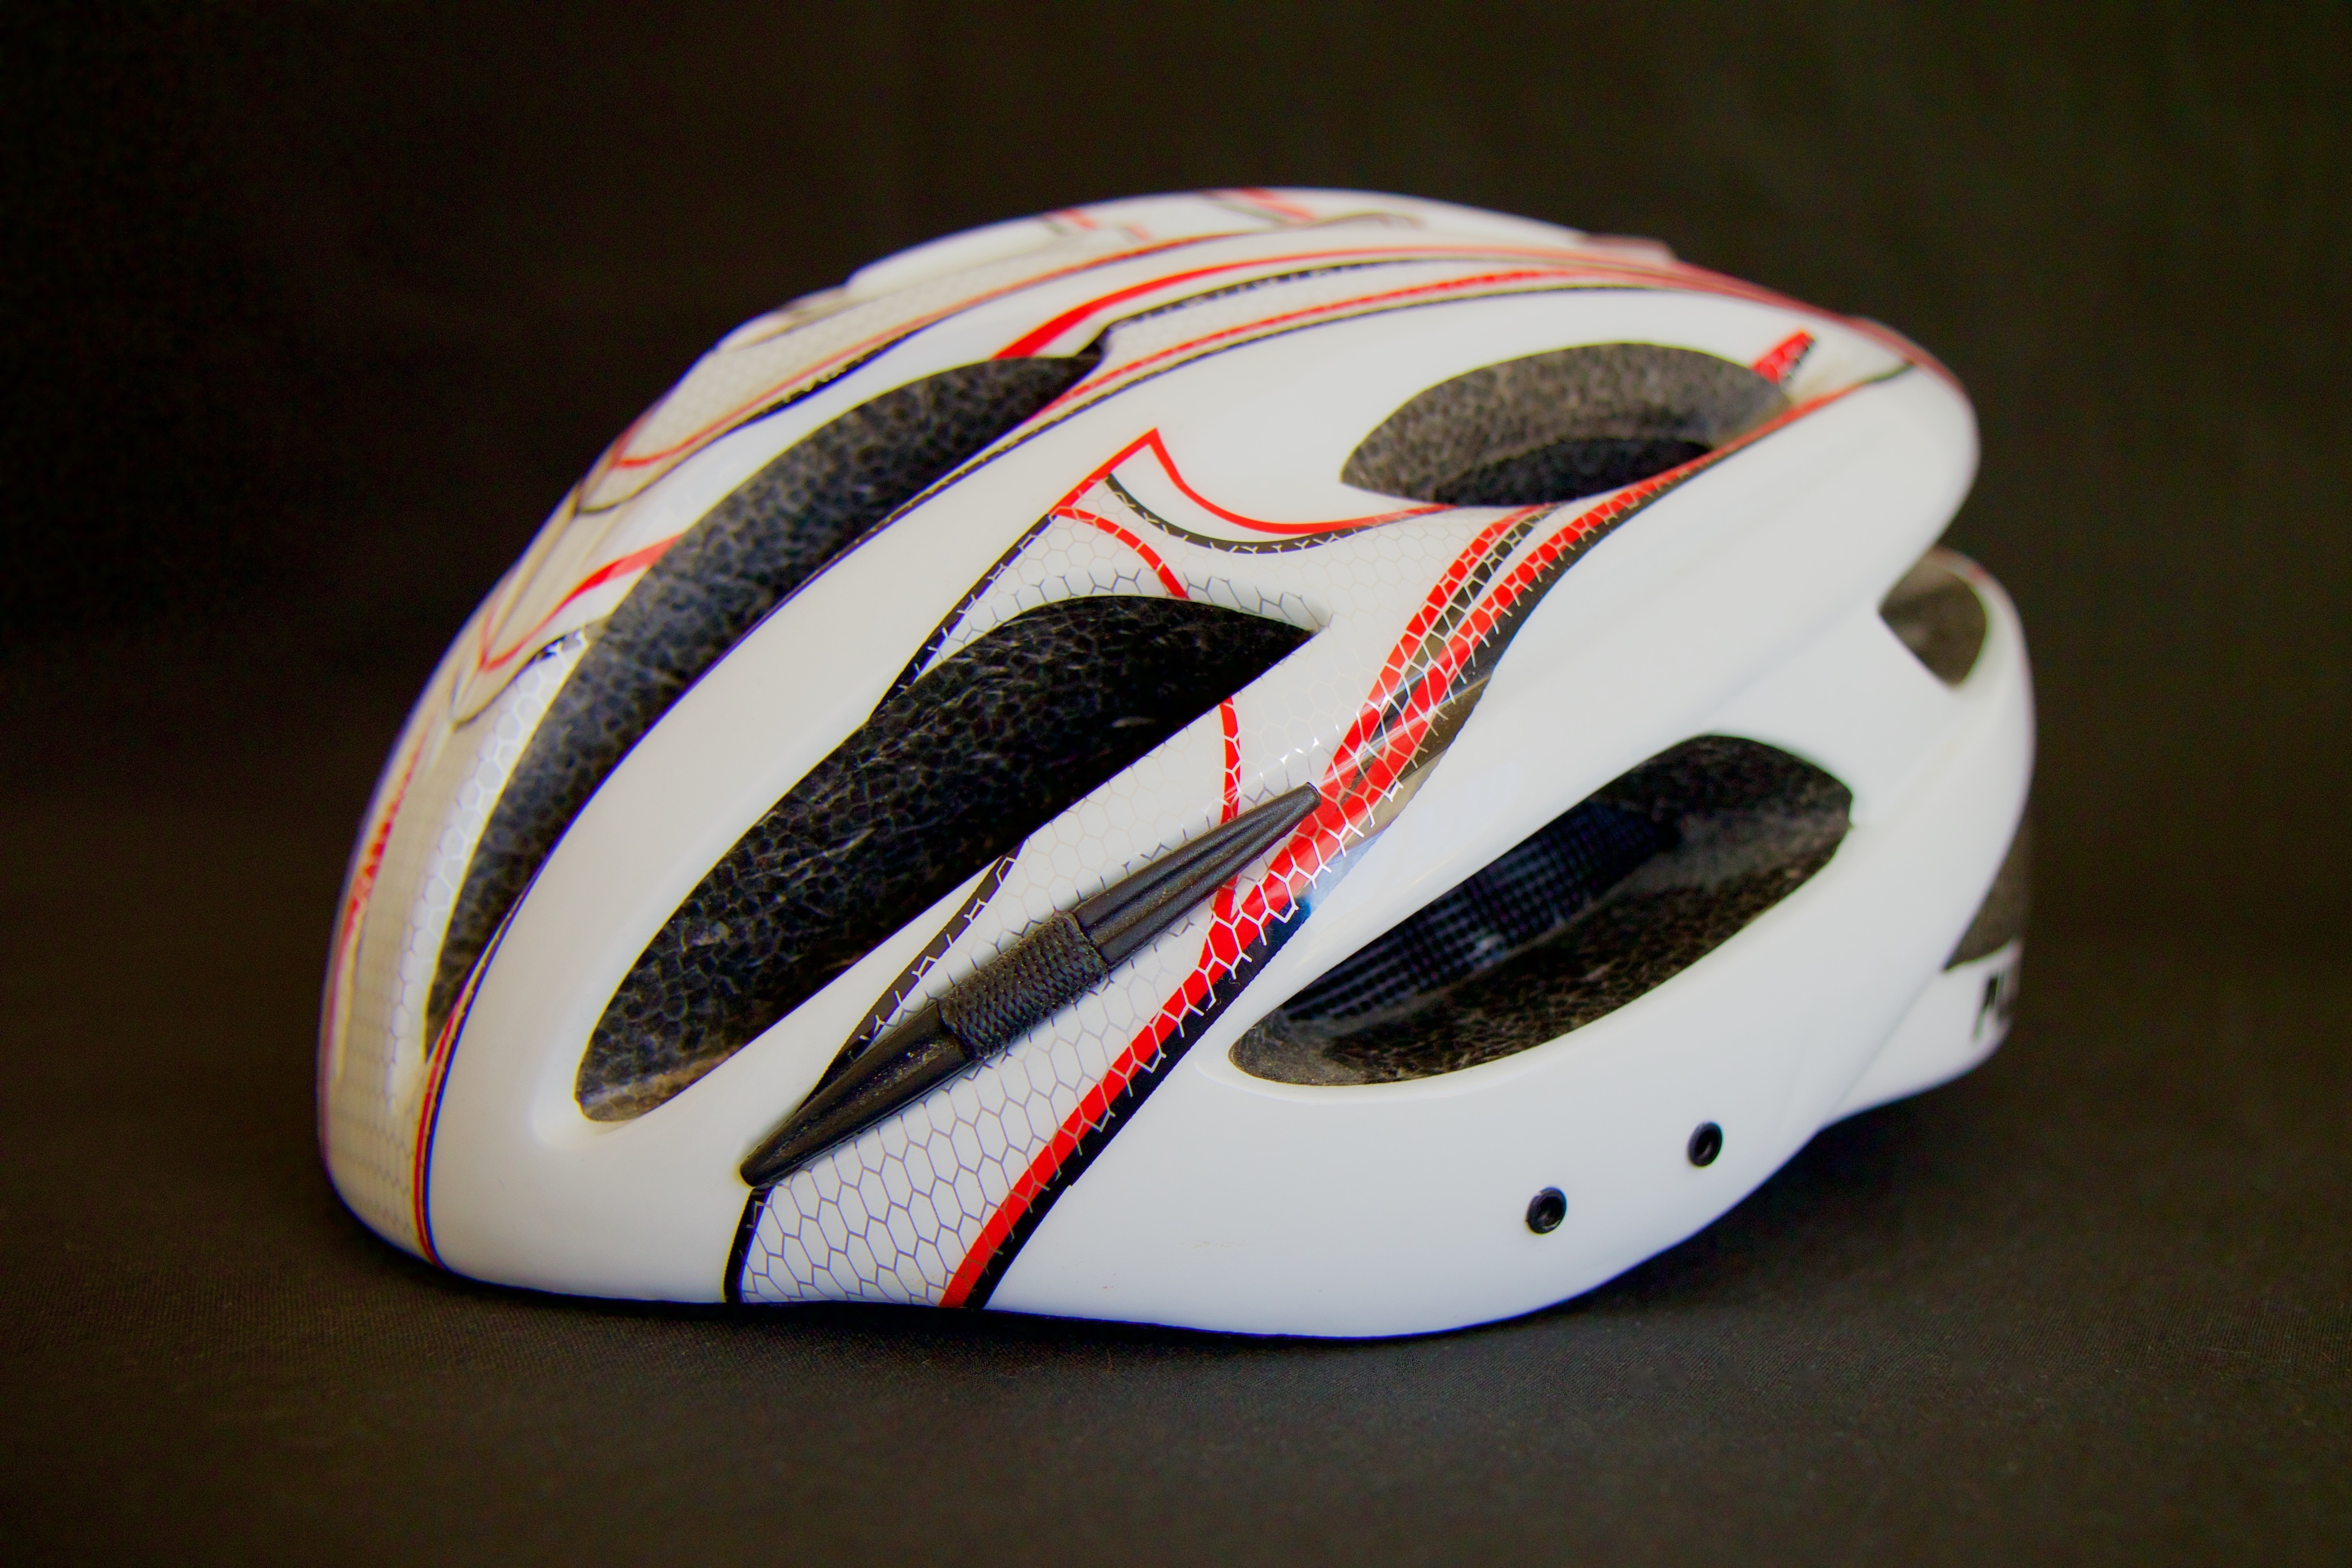 white and red bicycle helmet on a black surface